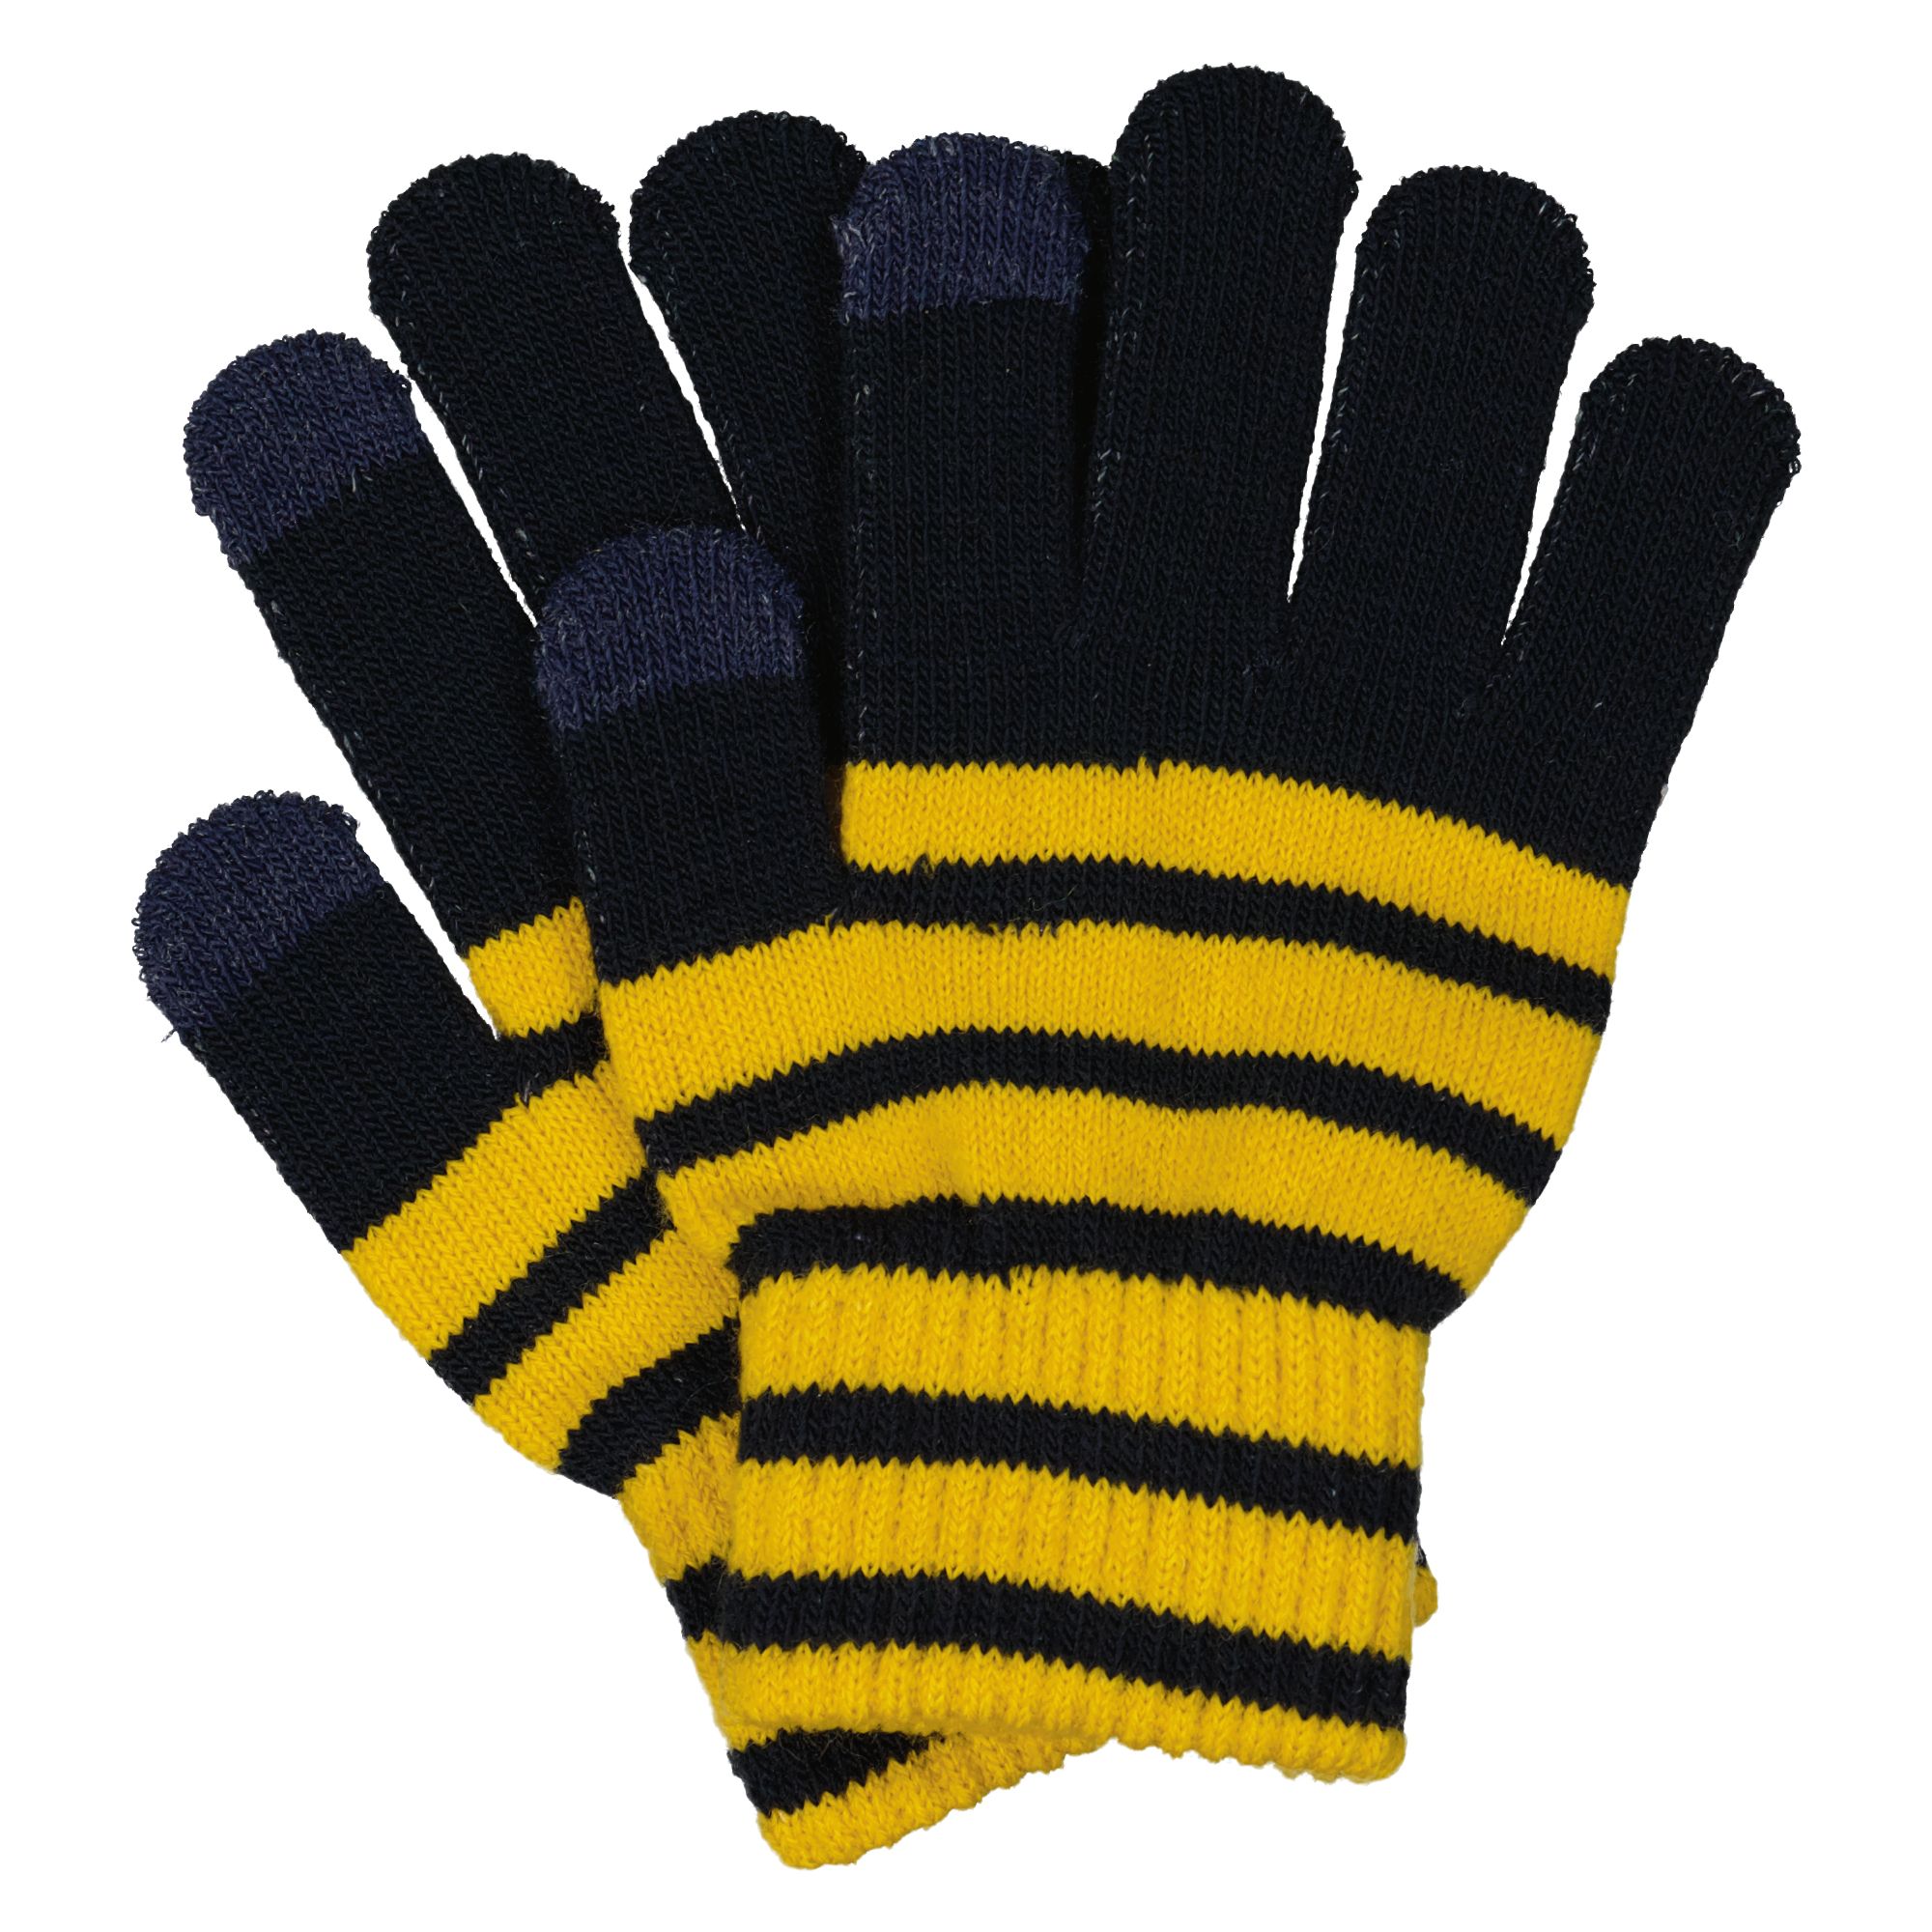 Magic finger gloves touch Mint/yellow